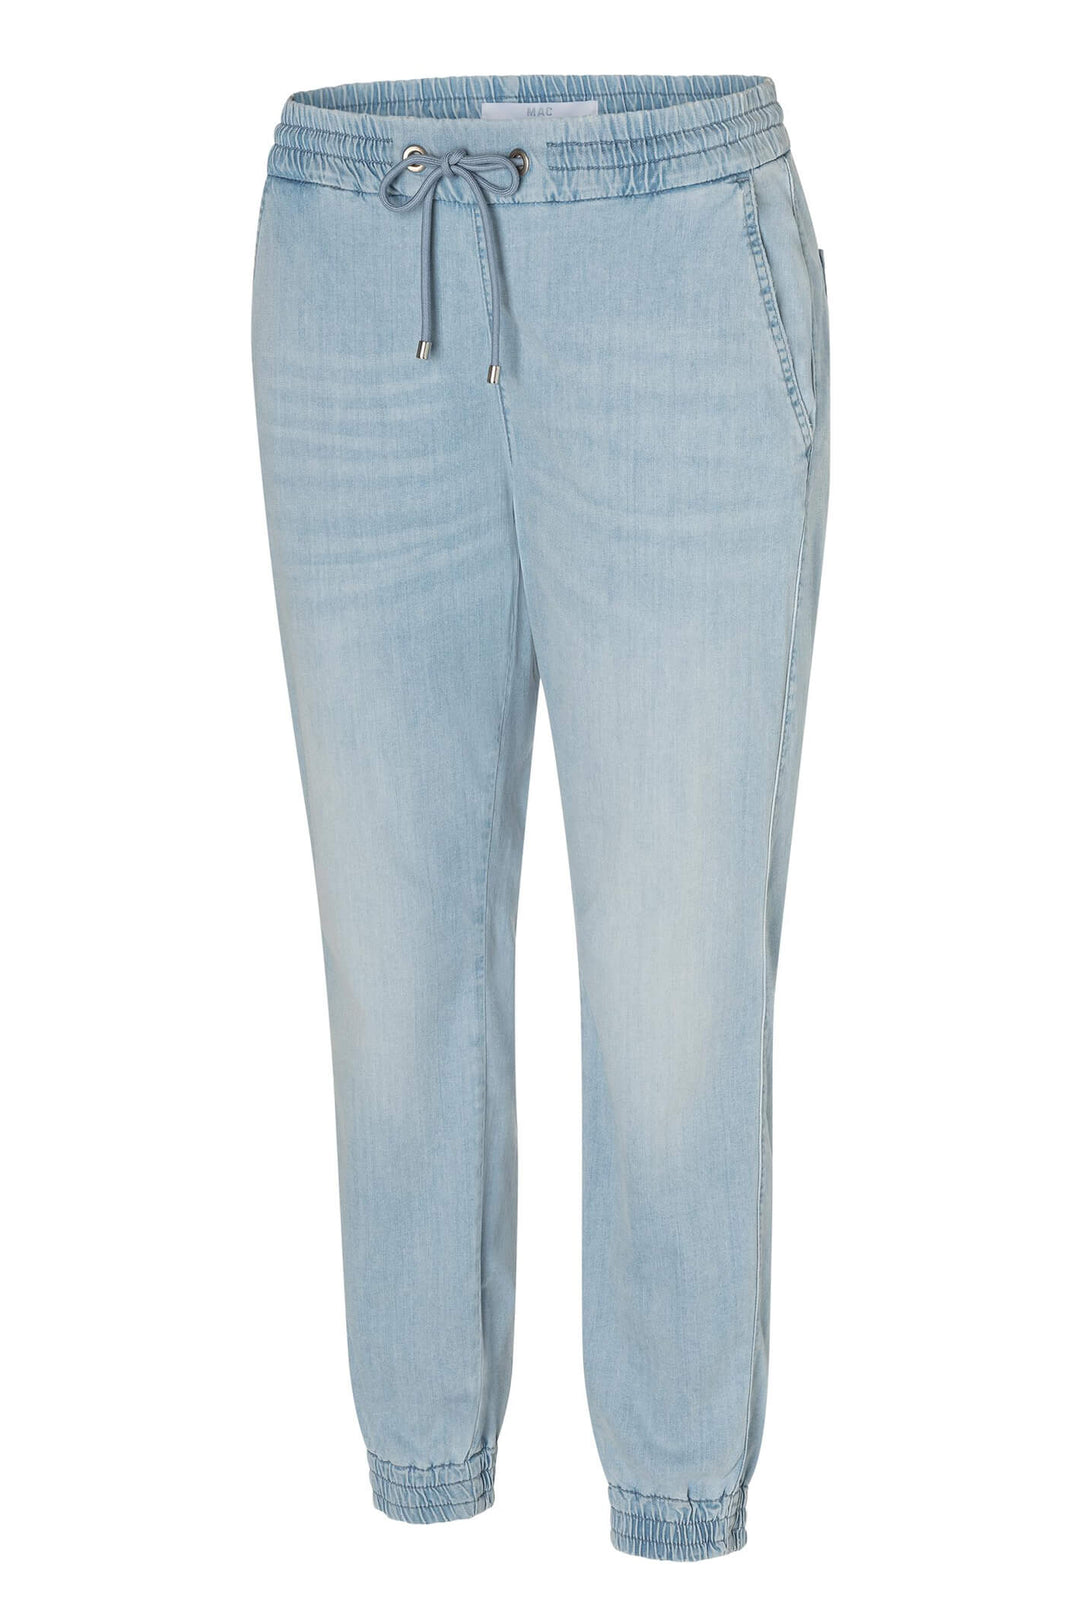 Mac 2771-90-0353 Easy Bright Baby Blue Jeans - Shirley Allum Boutique